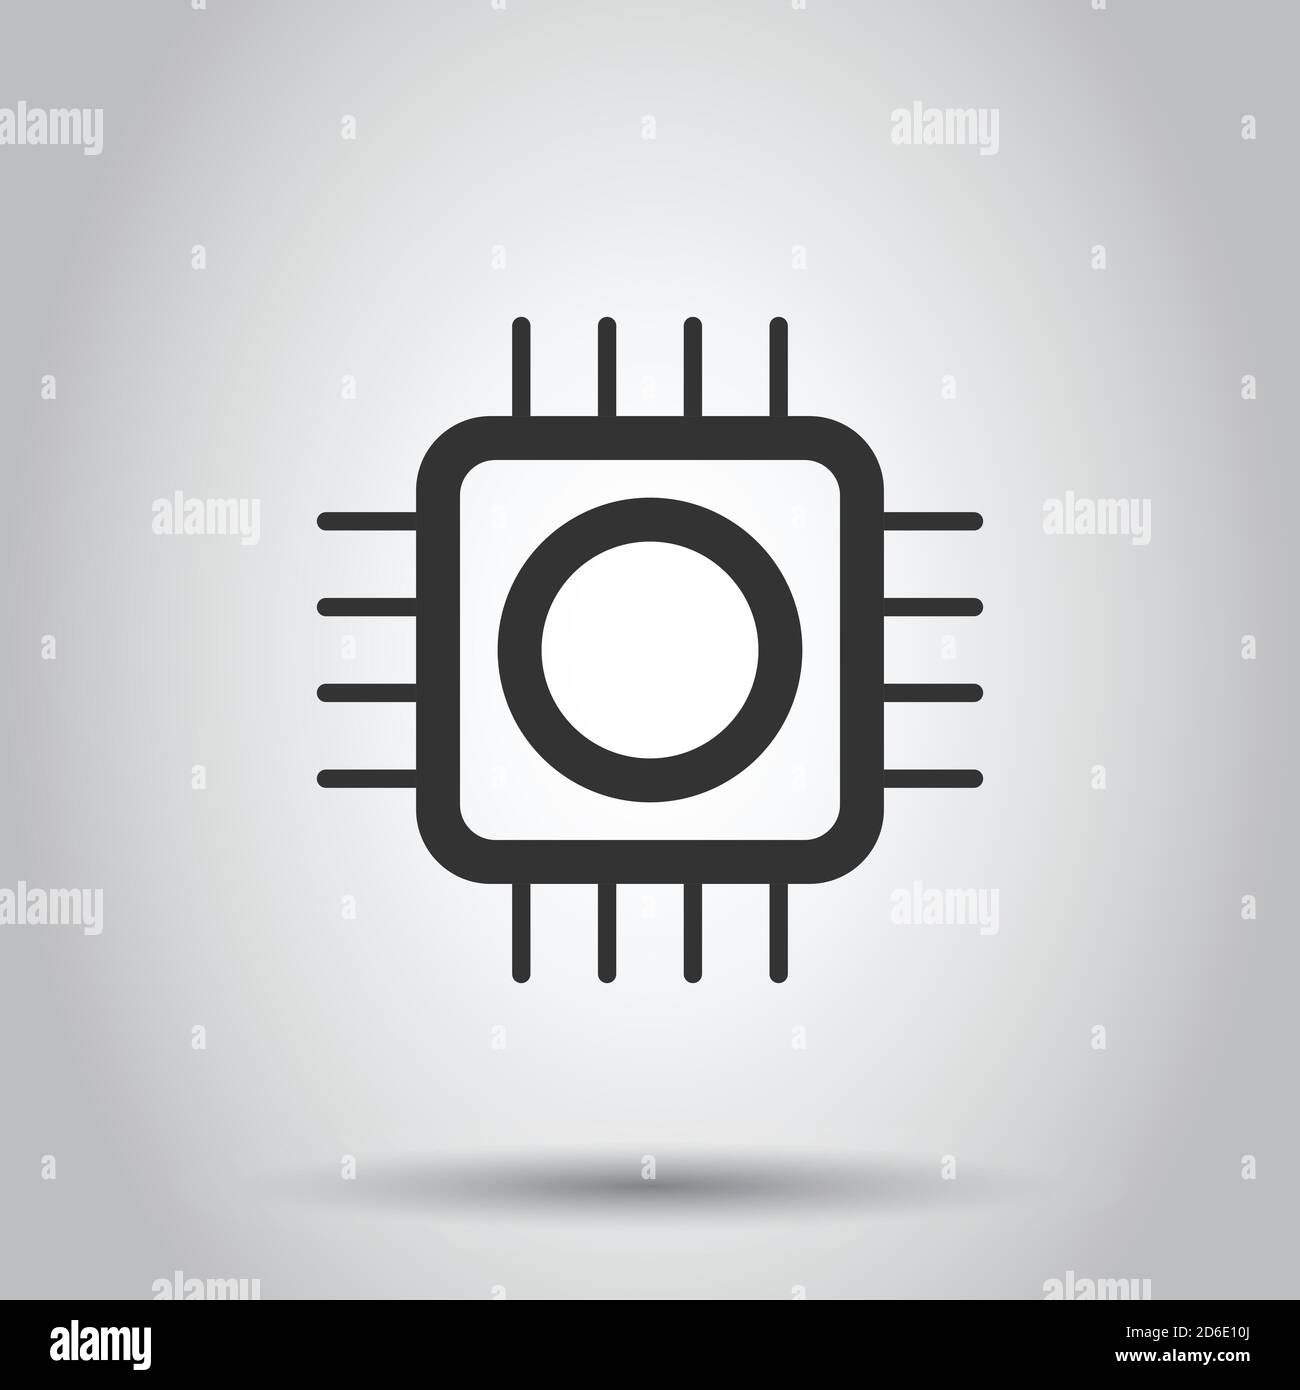 Computer cpu icon in flat style. Circuit board vector illustration on white isolated background. Motherboard chip business concept. Stock Vector